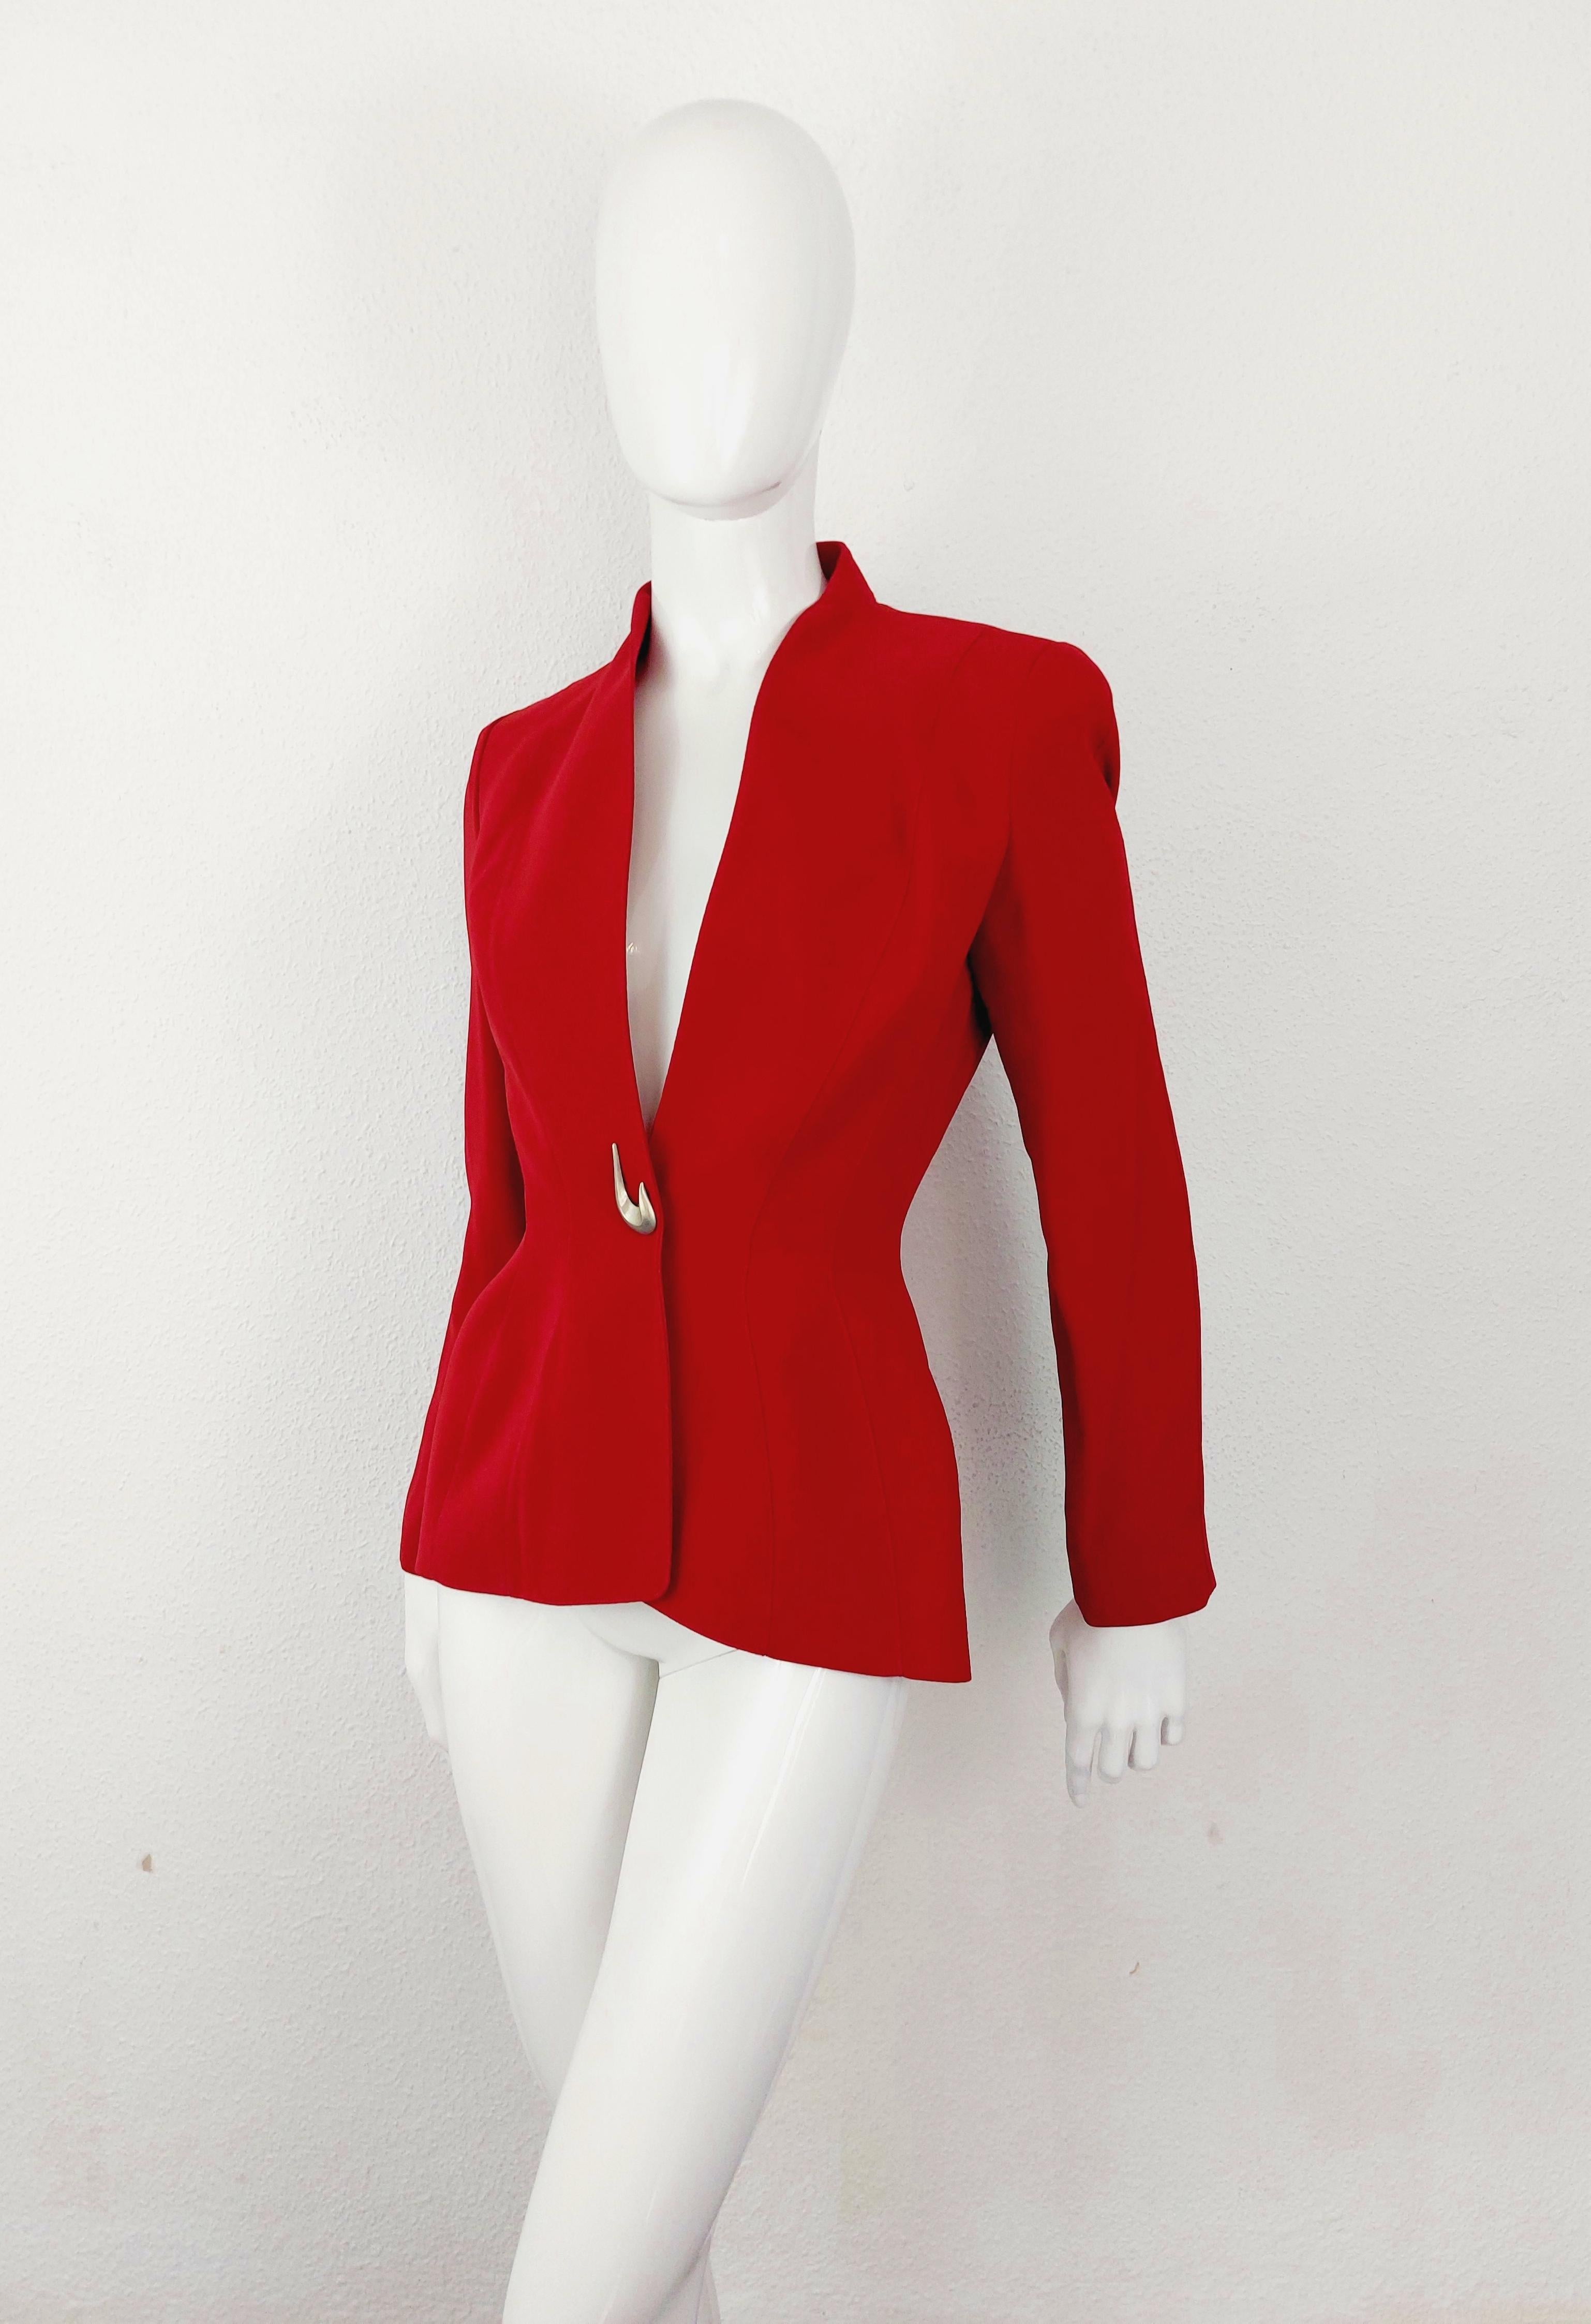 Thierry Mugler Couture 2000 AW Sculptural Thierry Mugler Couture 2000 AW Sculptural Exaggerated Dramatic Silhouette Red Metal Silver Buckle Brooch Blazer Coat Jacket 
Fabulous rare Thierry Mugler jacket, “3 Suisses” FW 2000s Collection. This